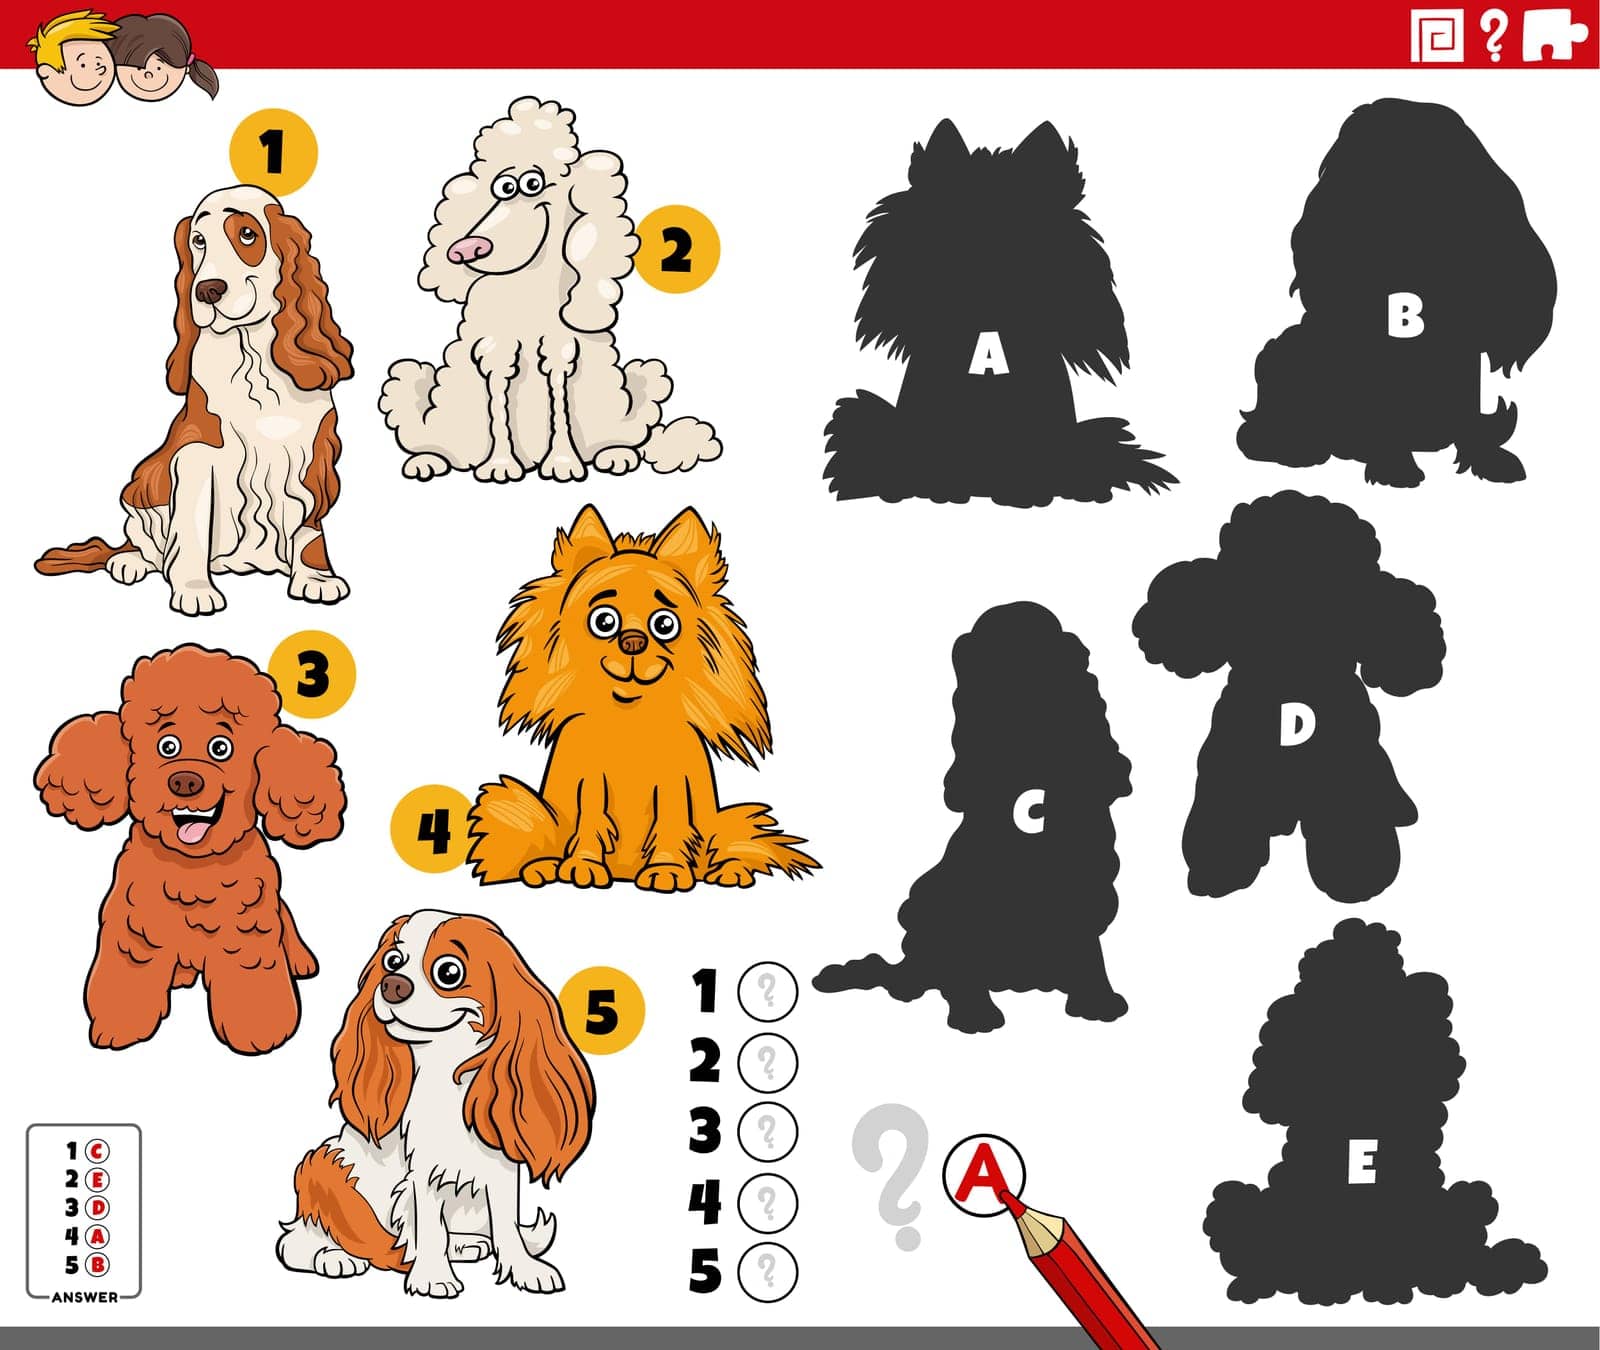 Cartoon illustration of finding the right shadows to the pictures educational game with purebred dogs animal characters